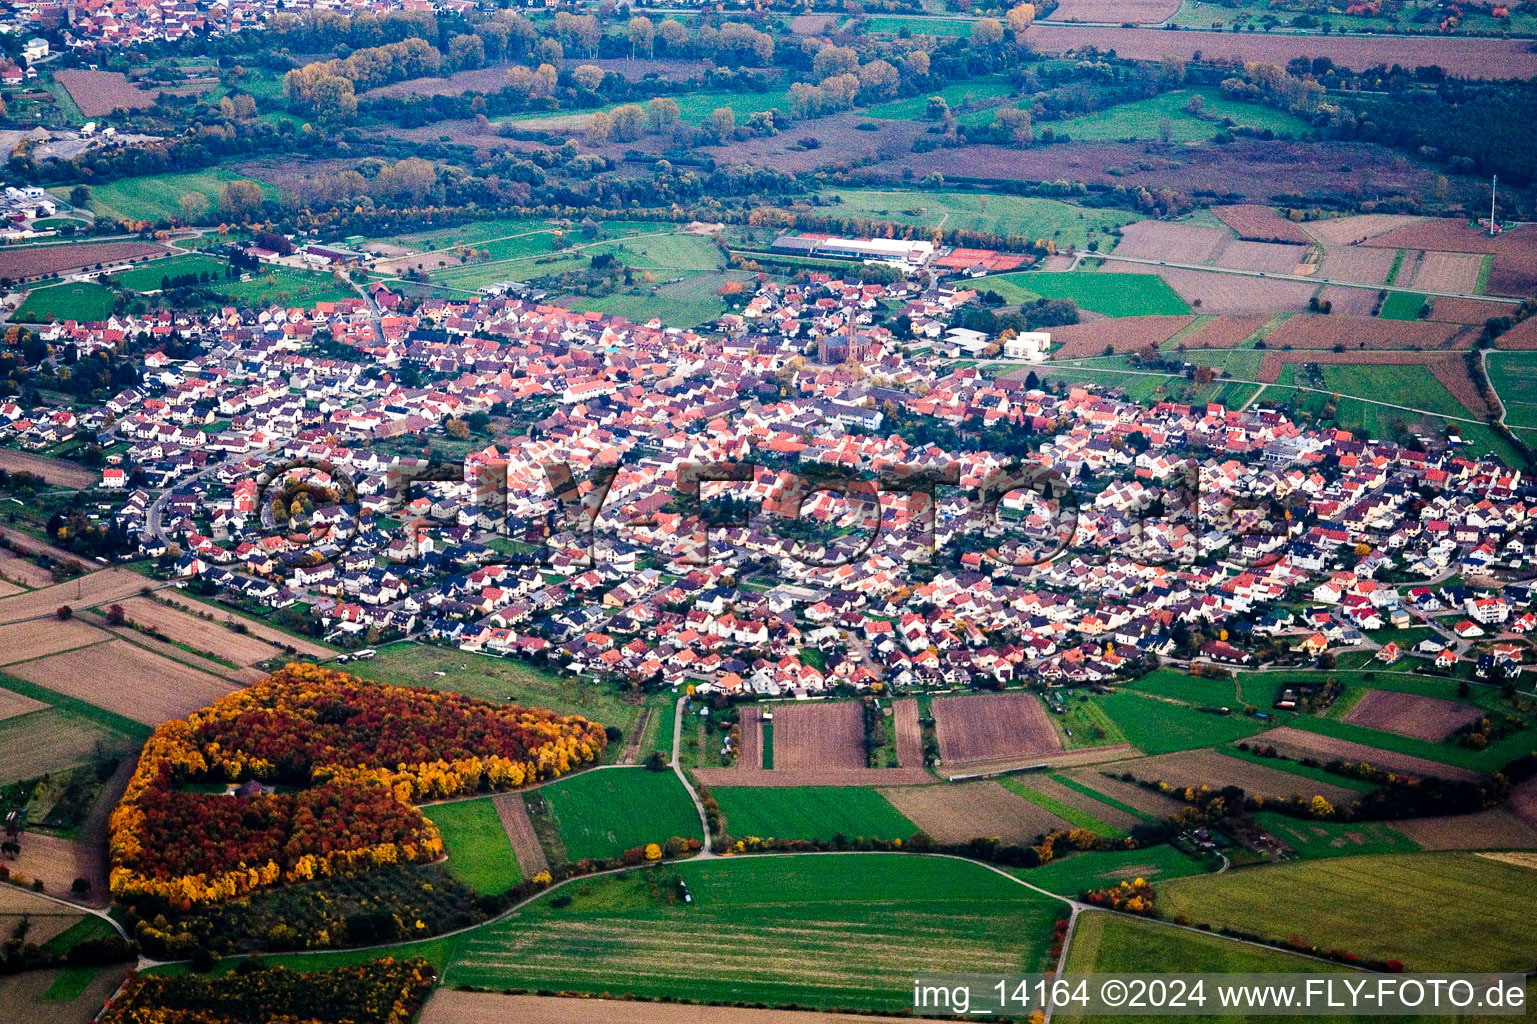 Town View of the streets and houses of the residential areas in the district Weiher in Ubstadt-Weiher in the state Baden-Wurttemberg